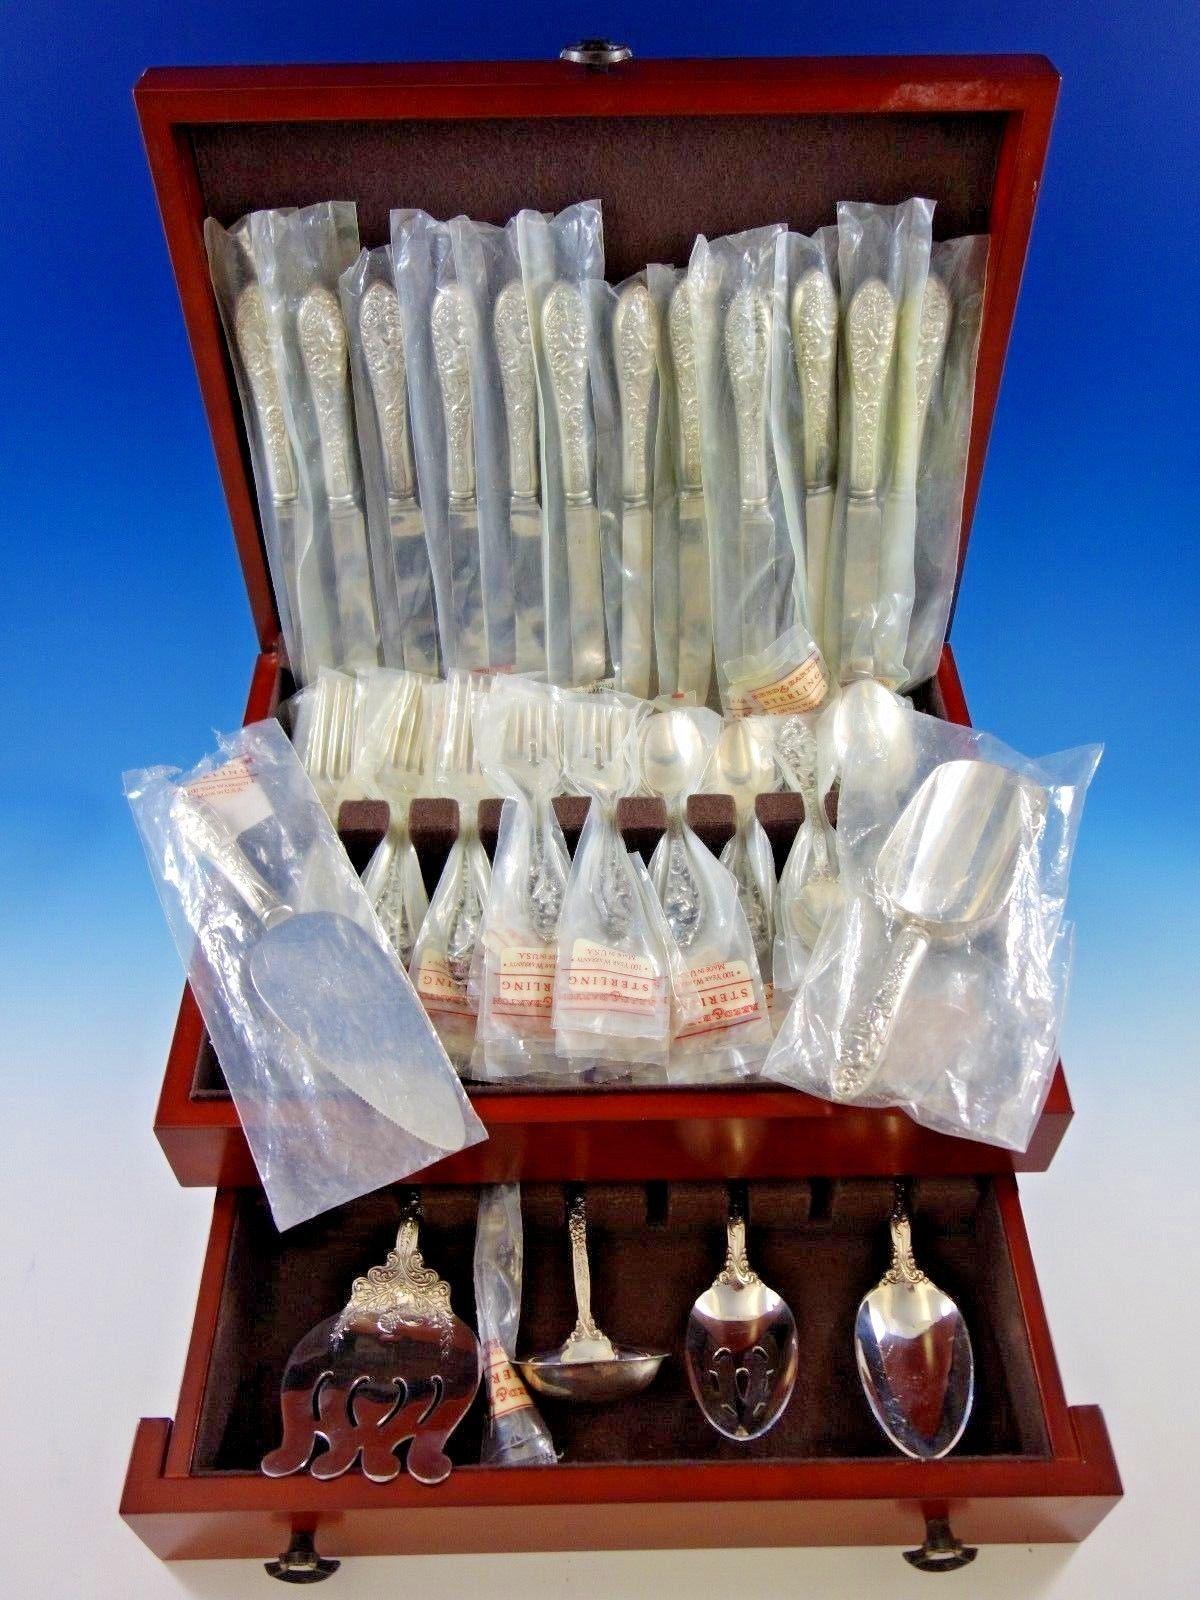 Labors of Cupid by Dominick and Haff sterling silver dinner size flatware set - 65 pieces. This set includes:

12 dinner size knives, 9 3/4